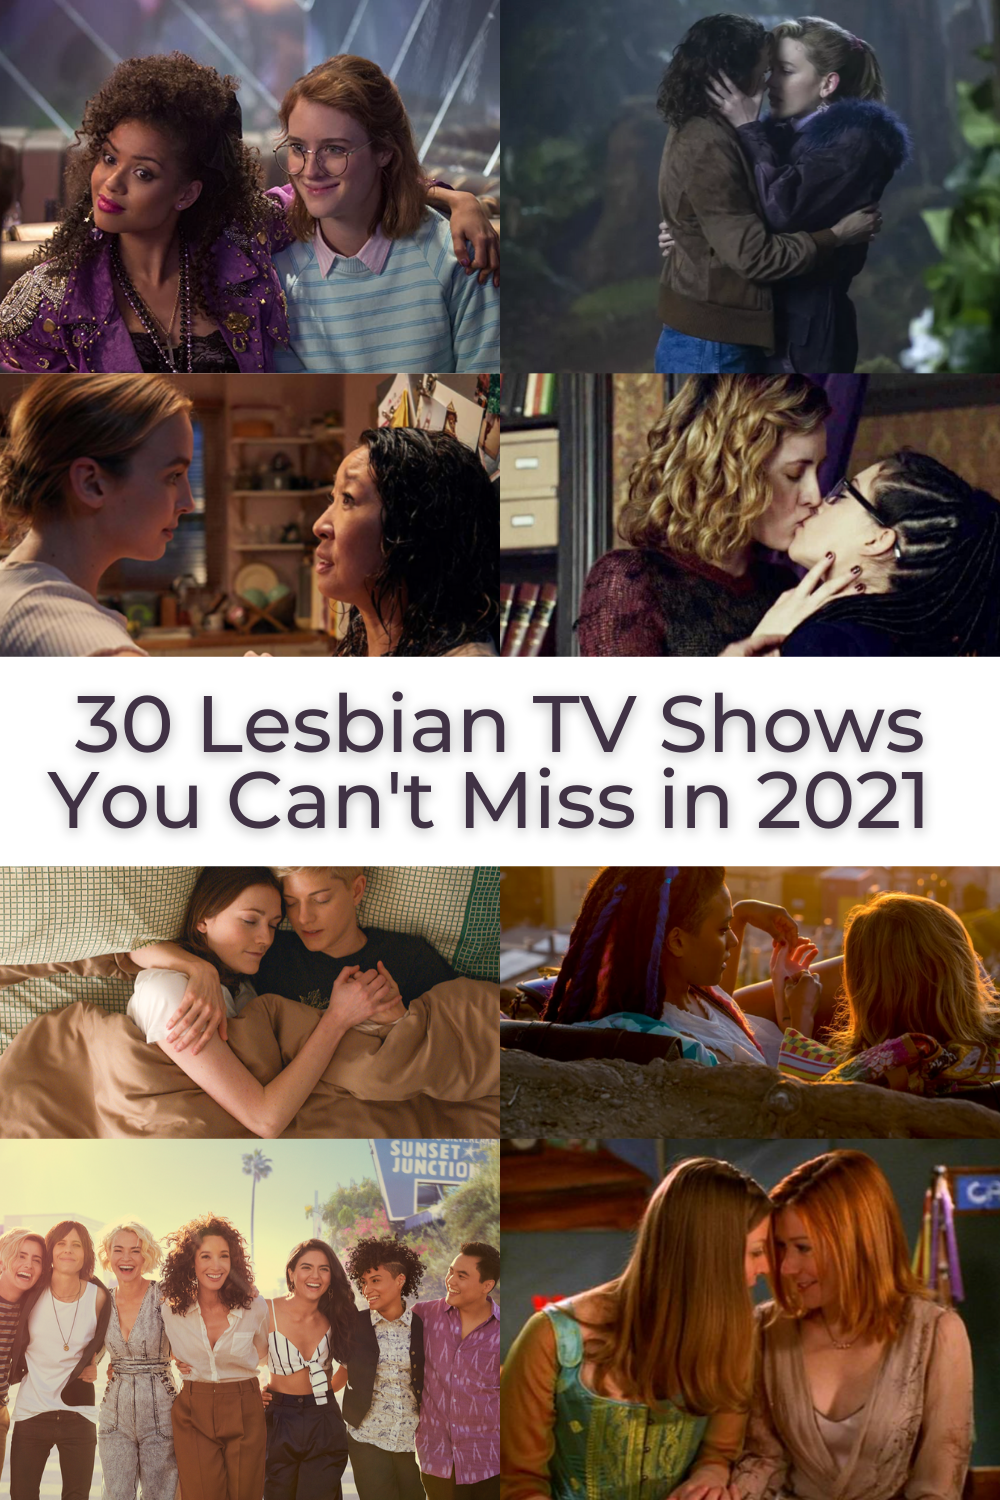 The 30 Best Queer and Lesbian TV Shows in 2021 photo